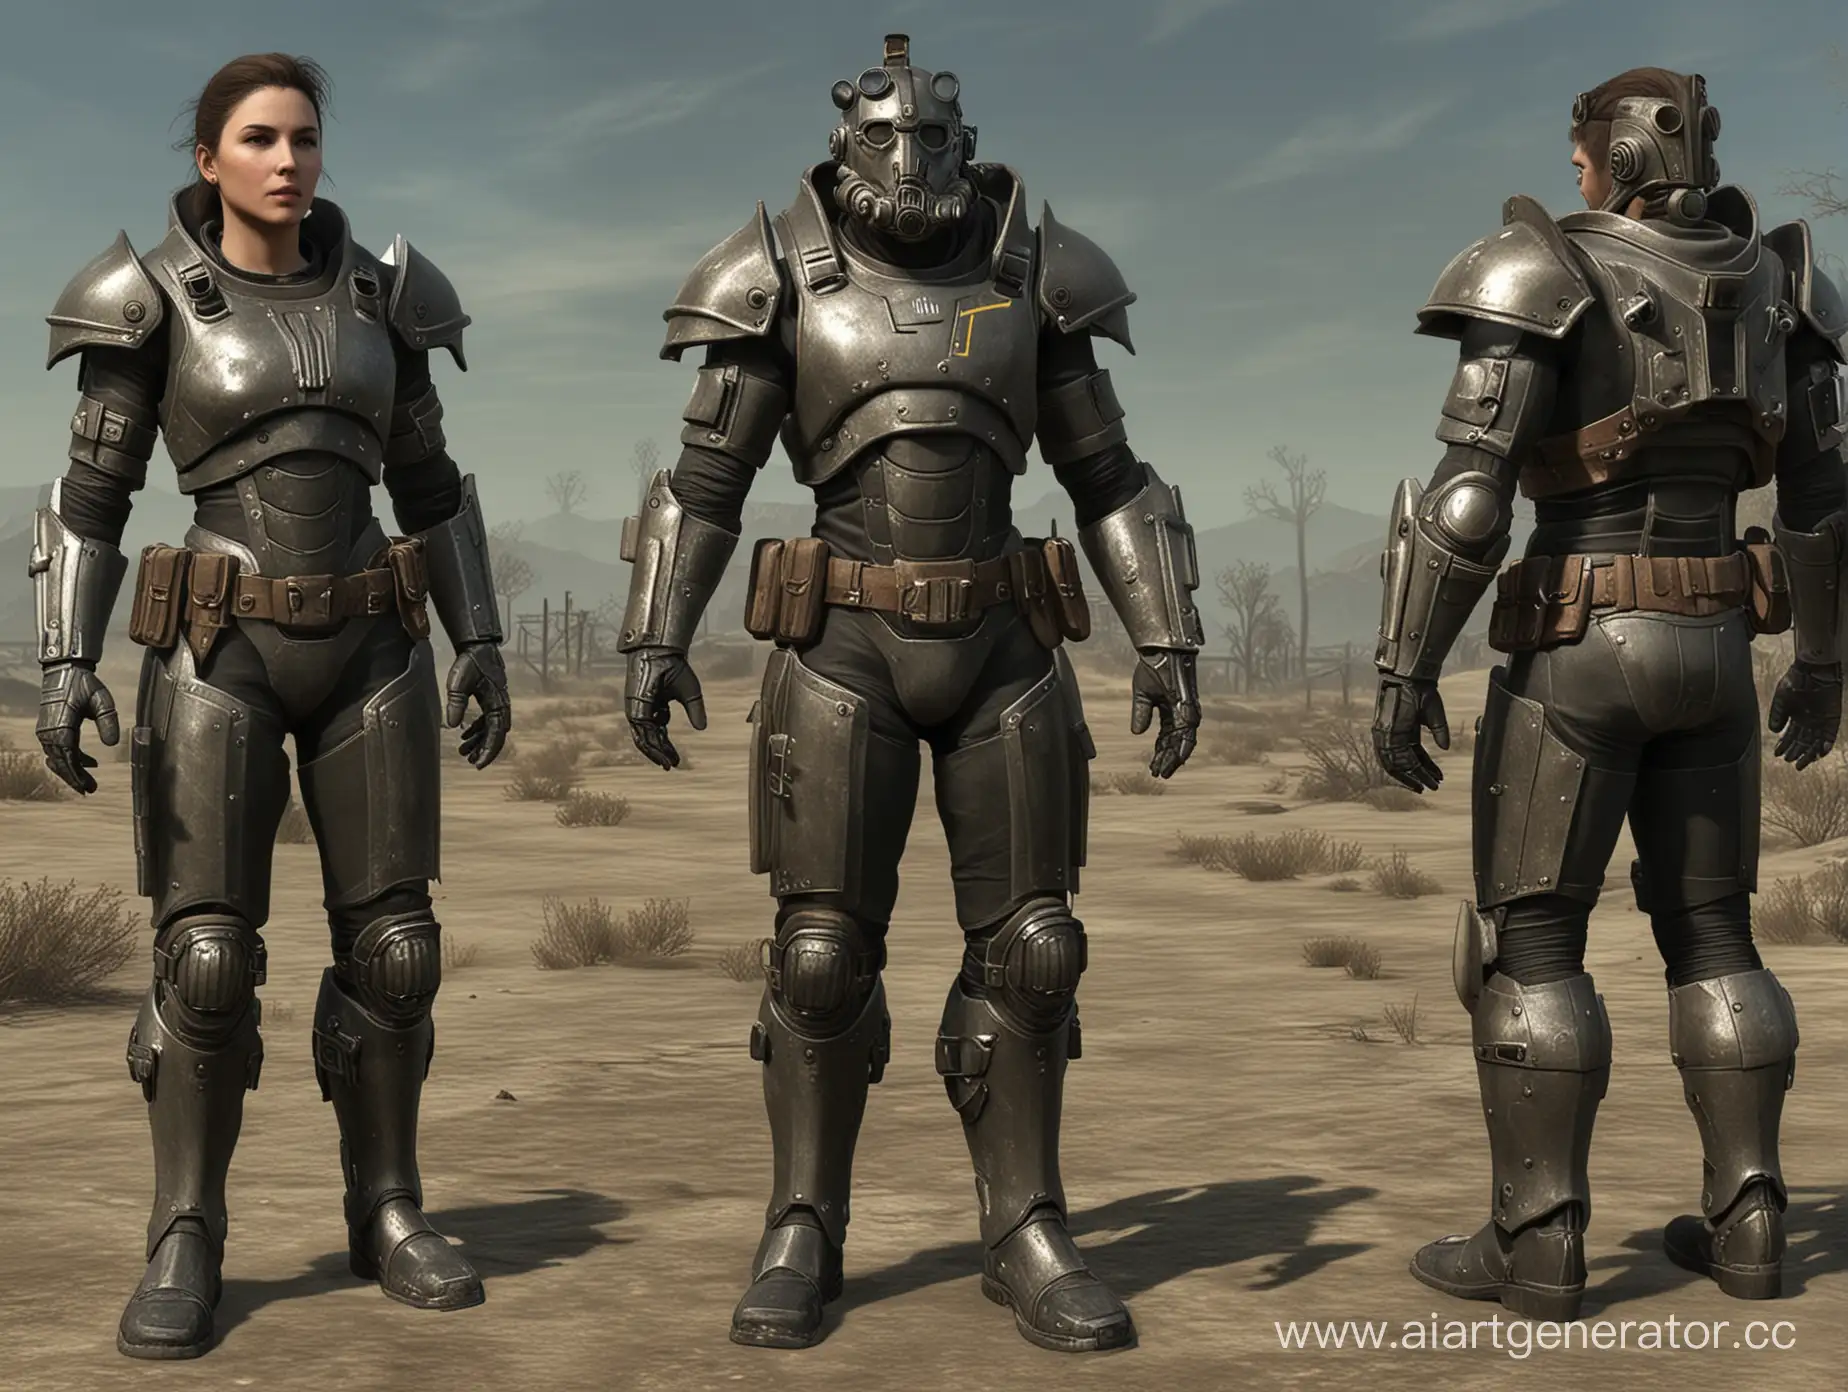 Futuristic-Fallout-Enclave-Armor-in-PostApocalyptic-Setting